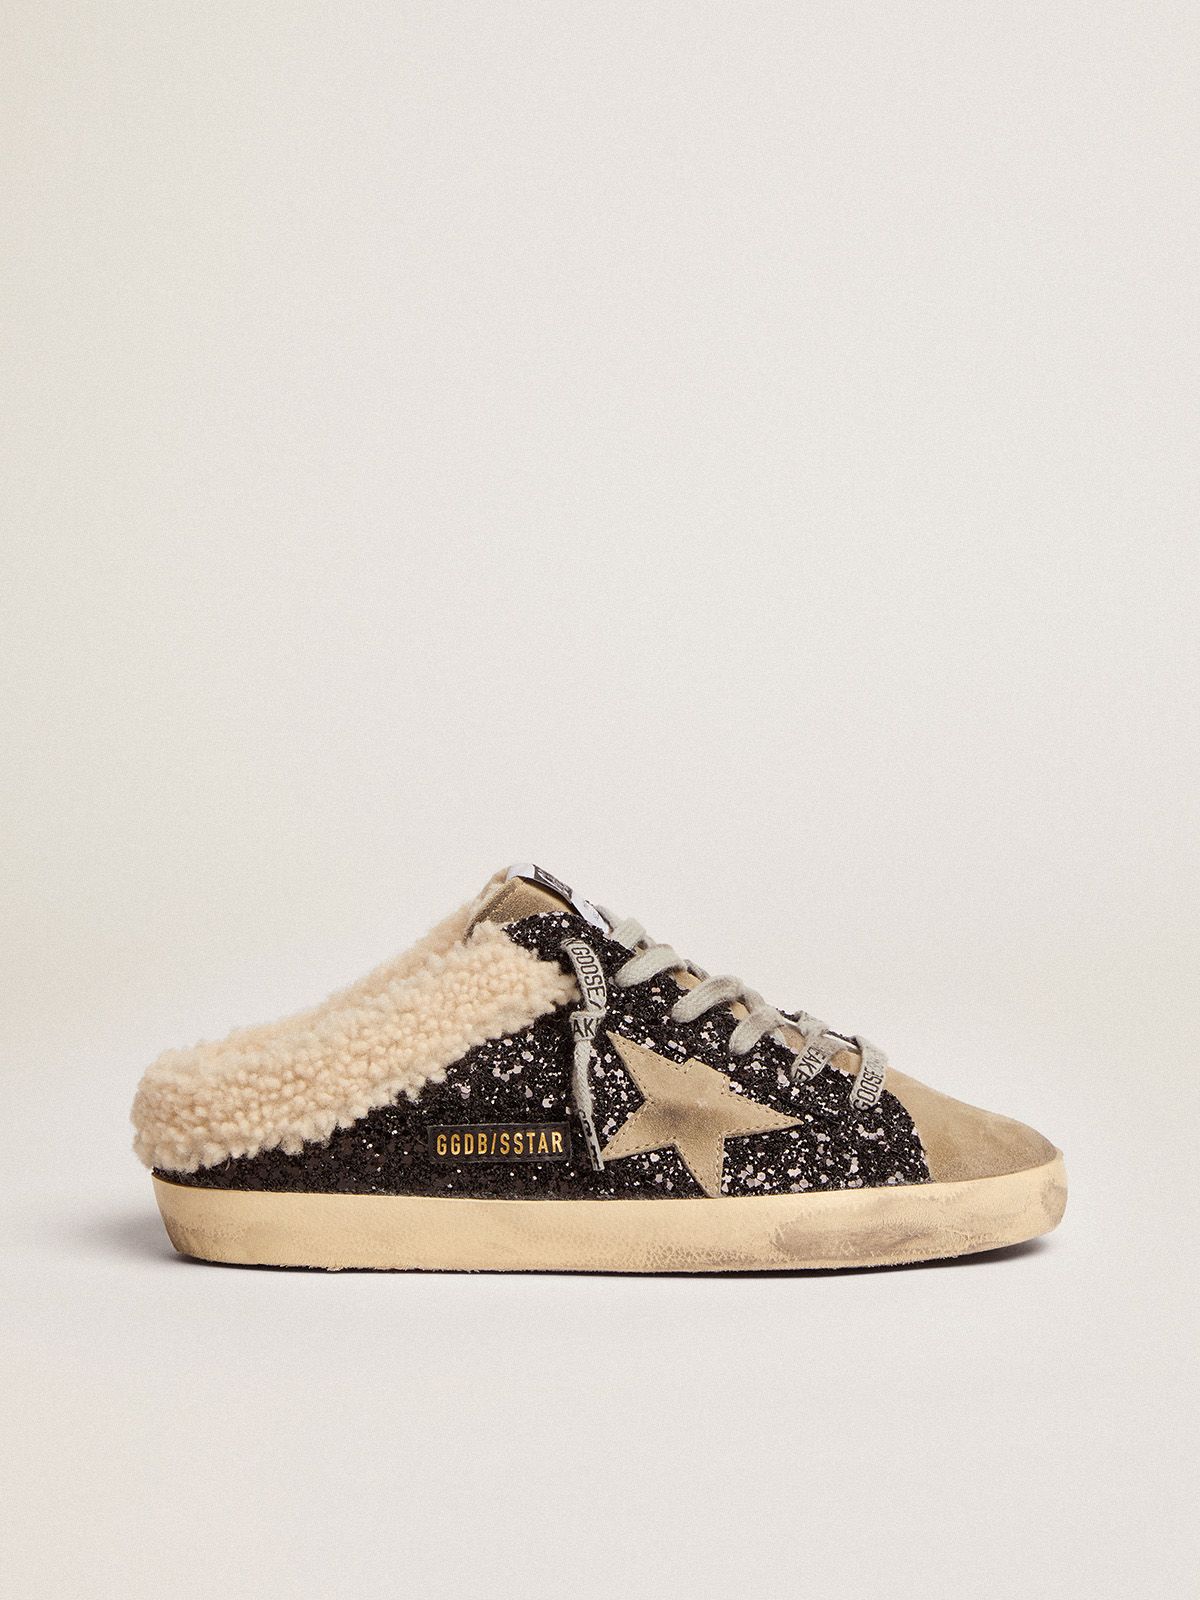 Golden Goose Stardan Super-Star Sabots LTD in black glitter with dove-gray suede star and shearling lining